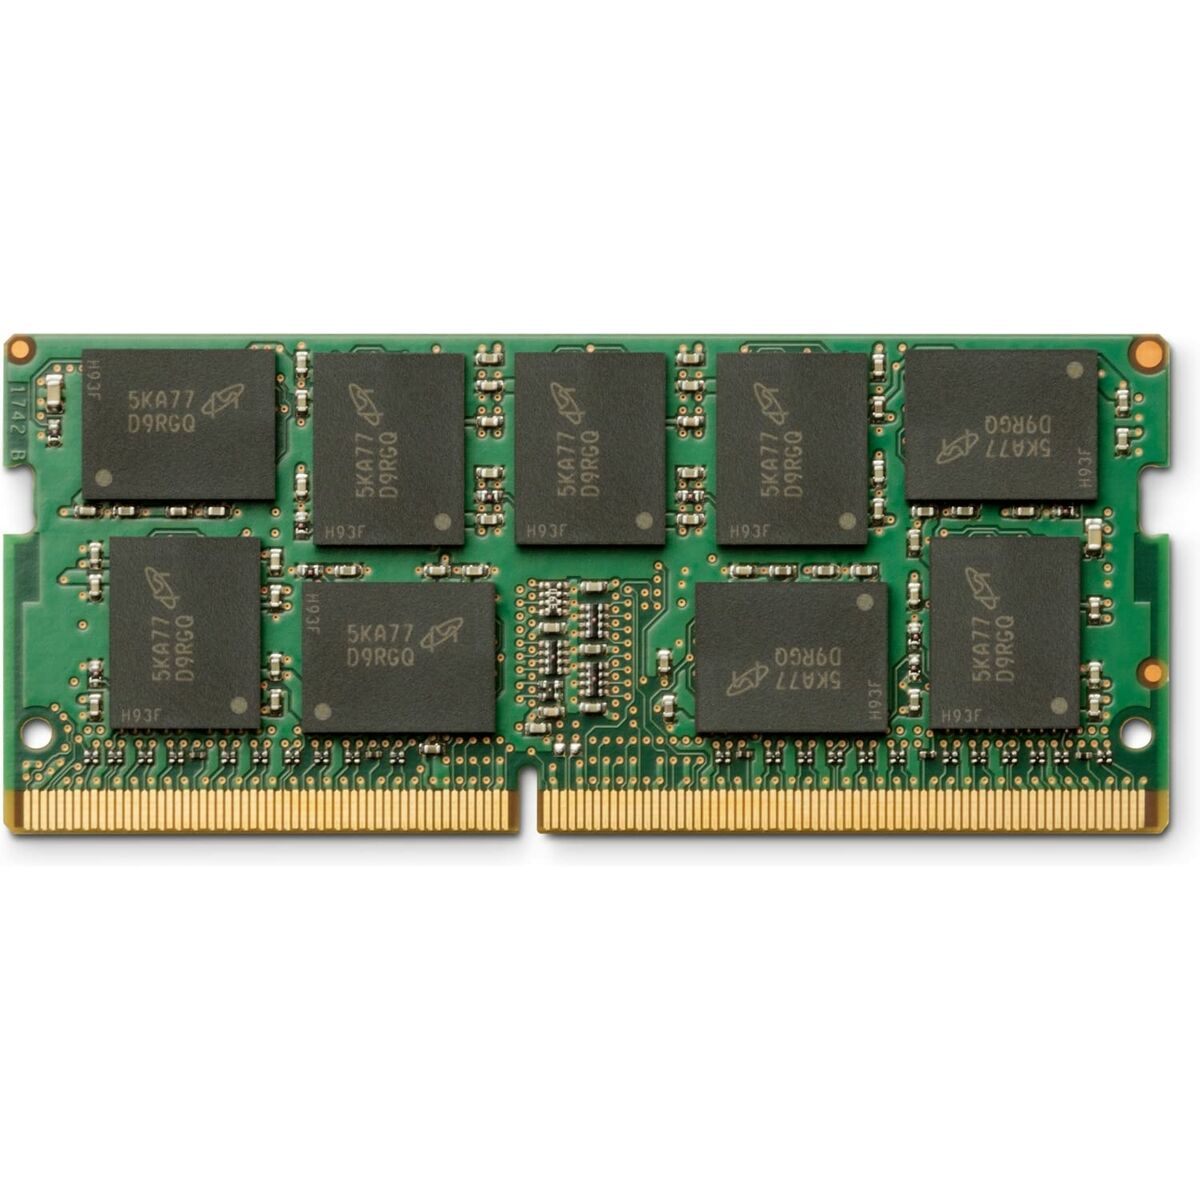 RAM Memory HP 141J2AA 3200 MHz 8 GB DDR4 SODIMM, HP, Computing, Components, ram-memory-hp-141j2aa-3200-mhz-8-gb-ddr4-sodimm, Brand_HP, category-reference-2609, category-reference-2803, category-reference-2807, category-reference-t-19685, category-reference-t-19912, category-reference-t-21360, computers / components, Condition_NEW, Price_200 - 300, Teleworking, RiotNook